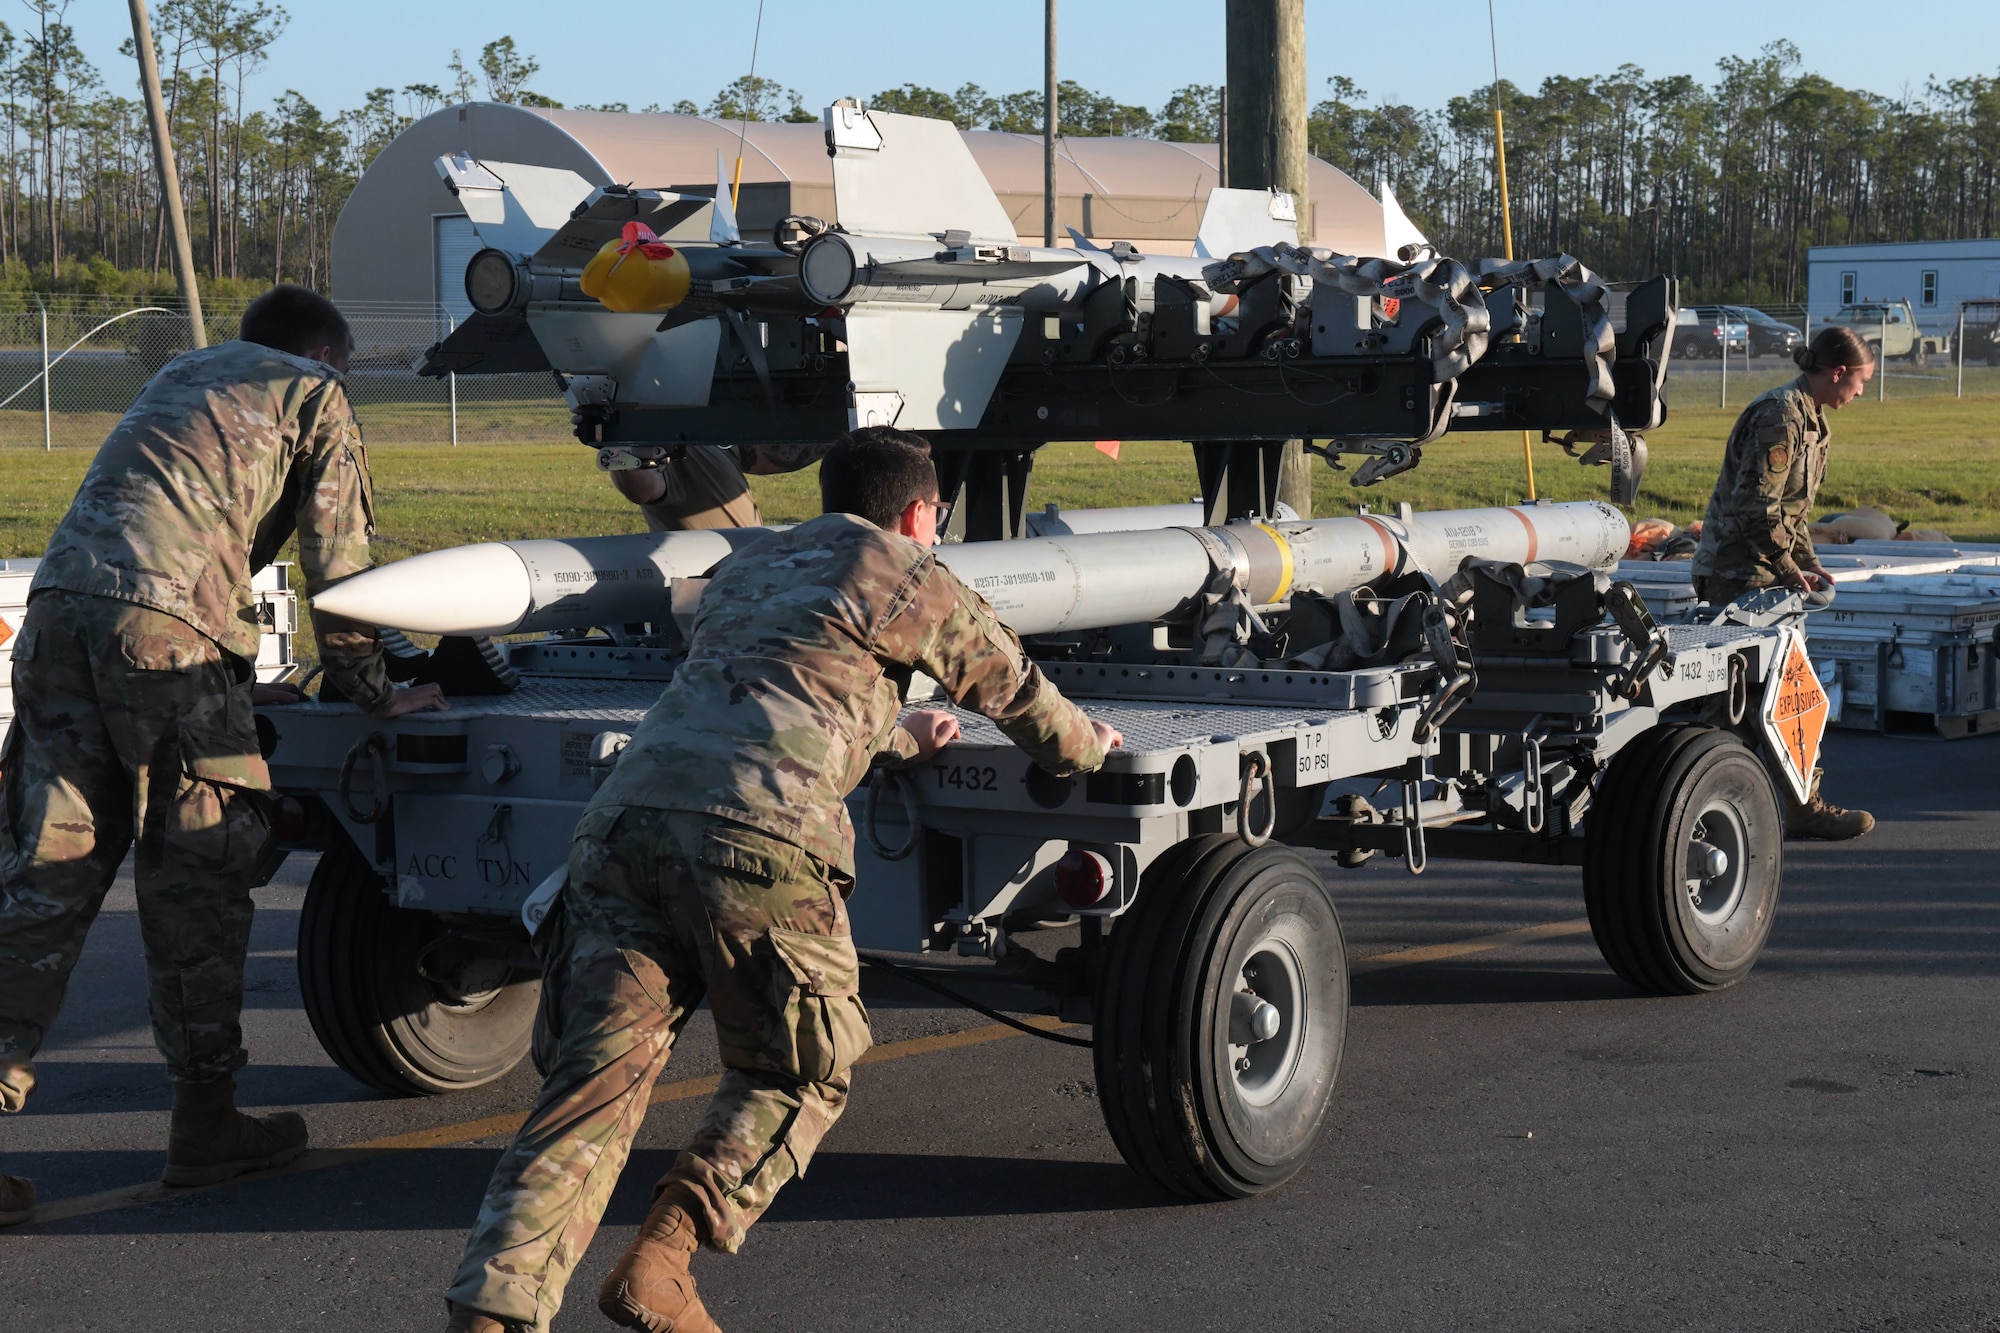 U.S. Airmen with the 325th Munitions Squadron push a munitions handling trailer at Tyndall Air Force Base, Florida, May 10, 2022.